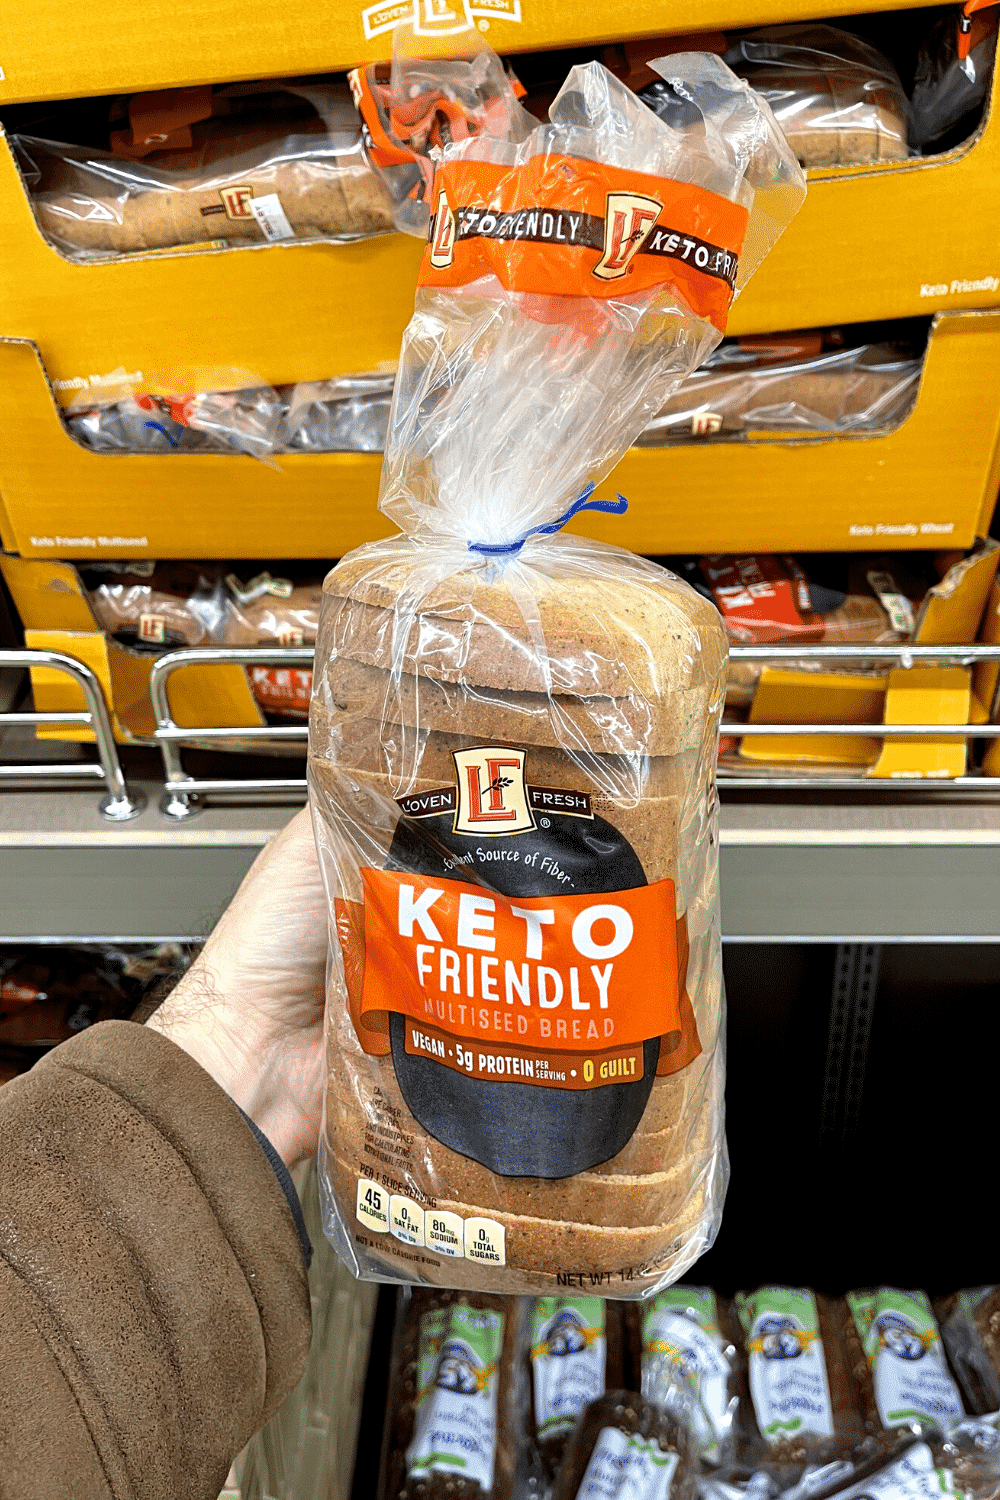 A hand holding a loaf of keto bread.